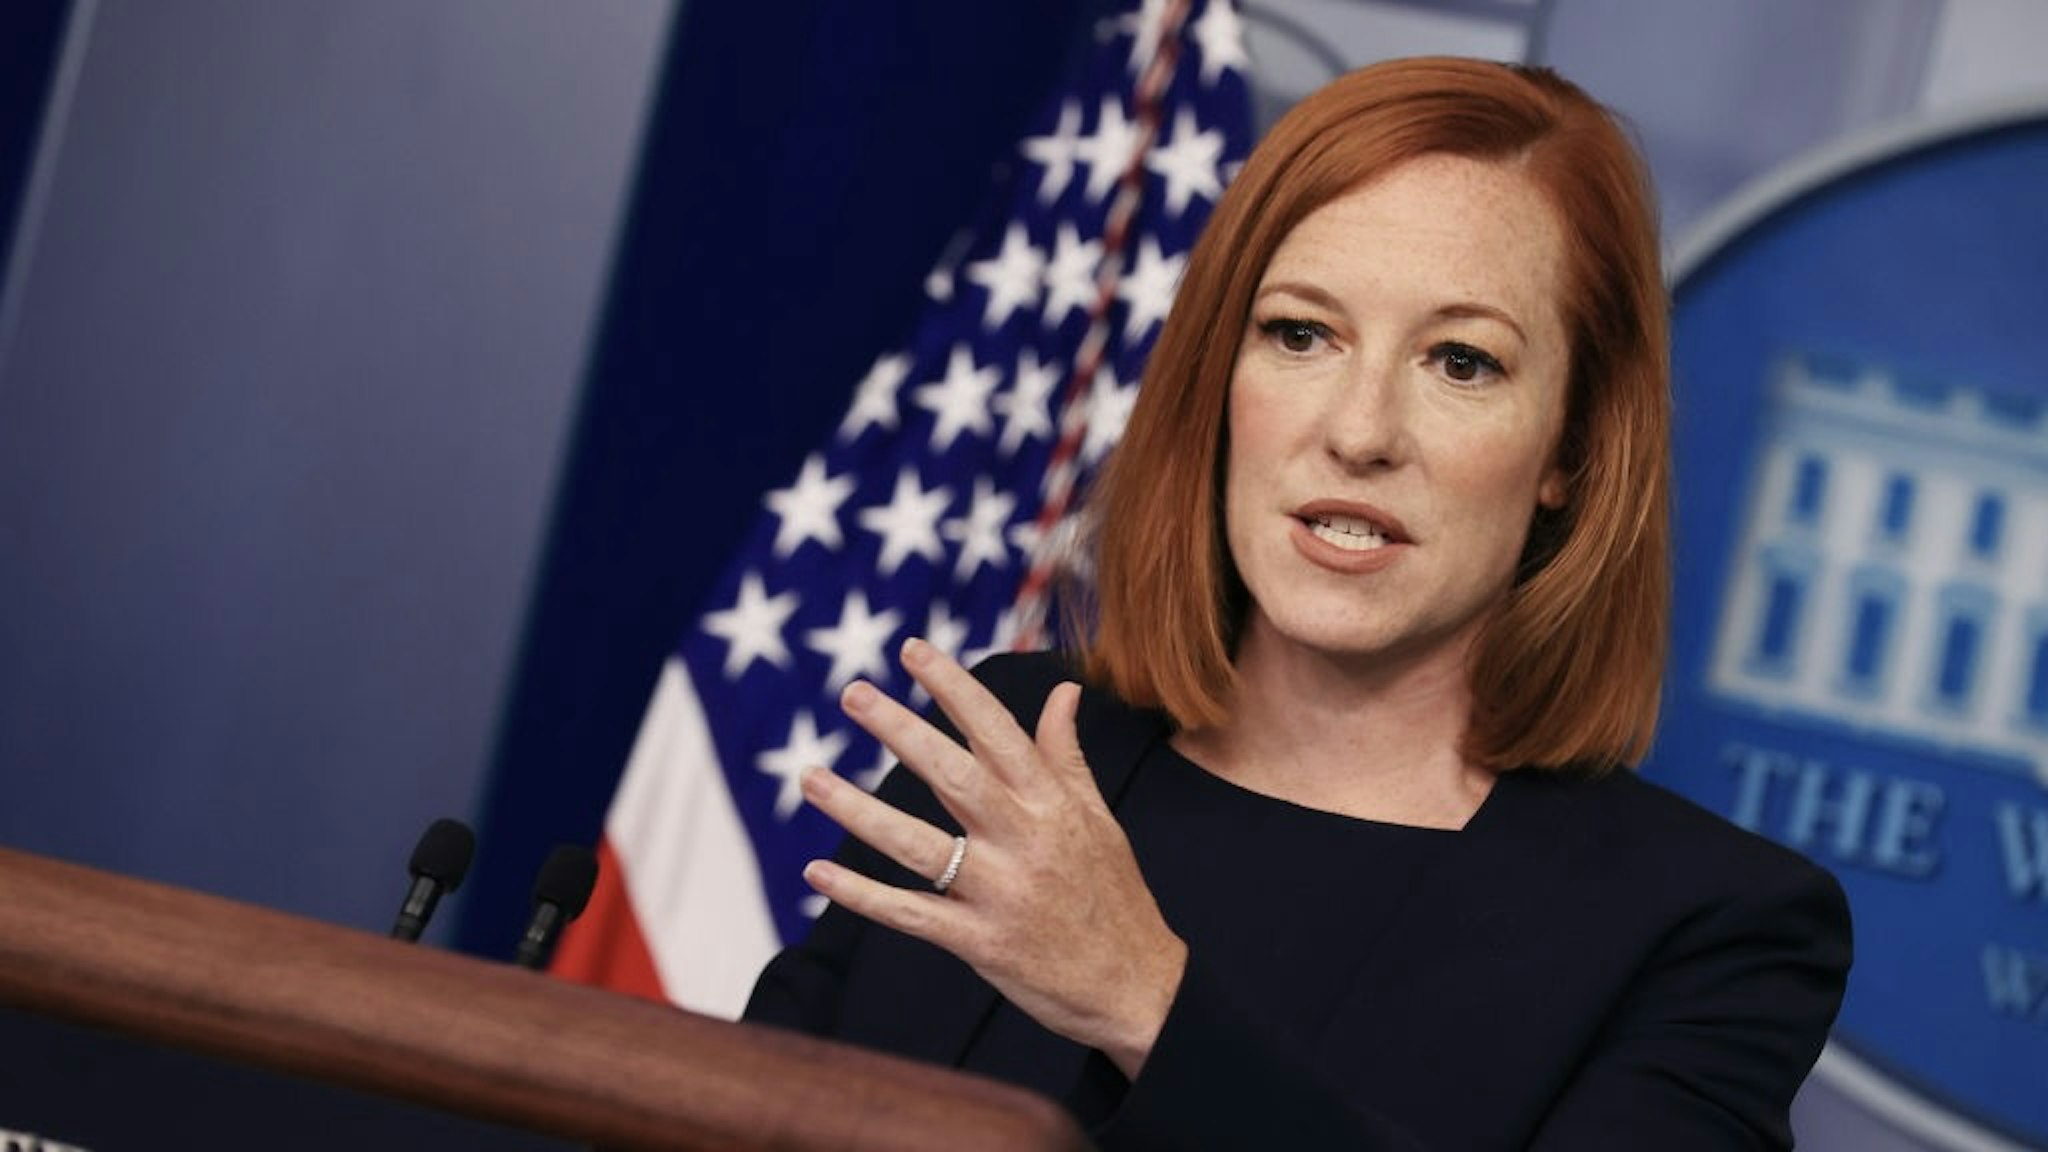 Press Secretary Psaki Briefs White House Media WASHINGTON, DC - JULY 12: White House Press Secretary Jen Psaki holds news conference with reporters in the Brady Press Briefing Room at the White House on July 12, 2021 in Washington, DC. Psaki was asked about anti-government protests in Cuba, the assassination of the Haitian president and ongoing work to vaccinate people against COVID-19. (Photo by Chip Somodevilla/Getty Images) Chip Somodevilla / Staff via Getty Images